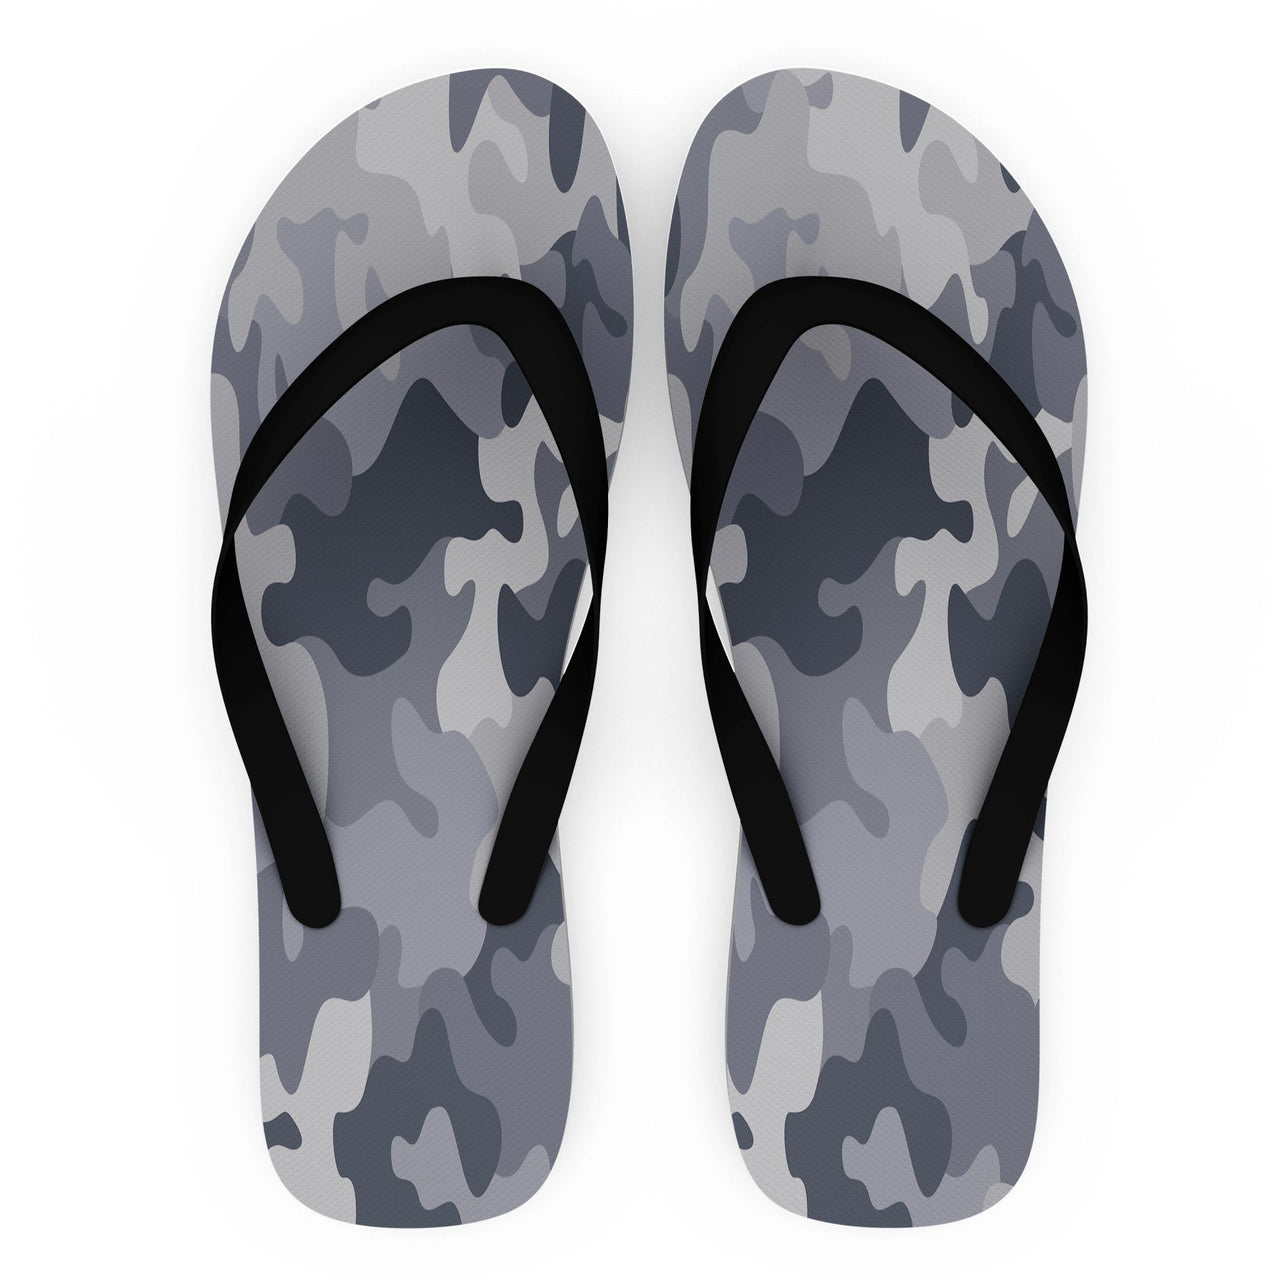 Military Camouflage Army Gray Designed Slippers (Flip Flops)